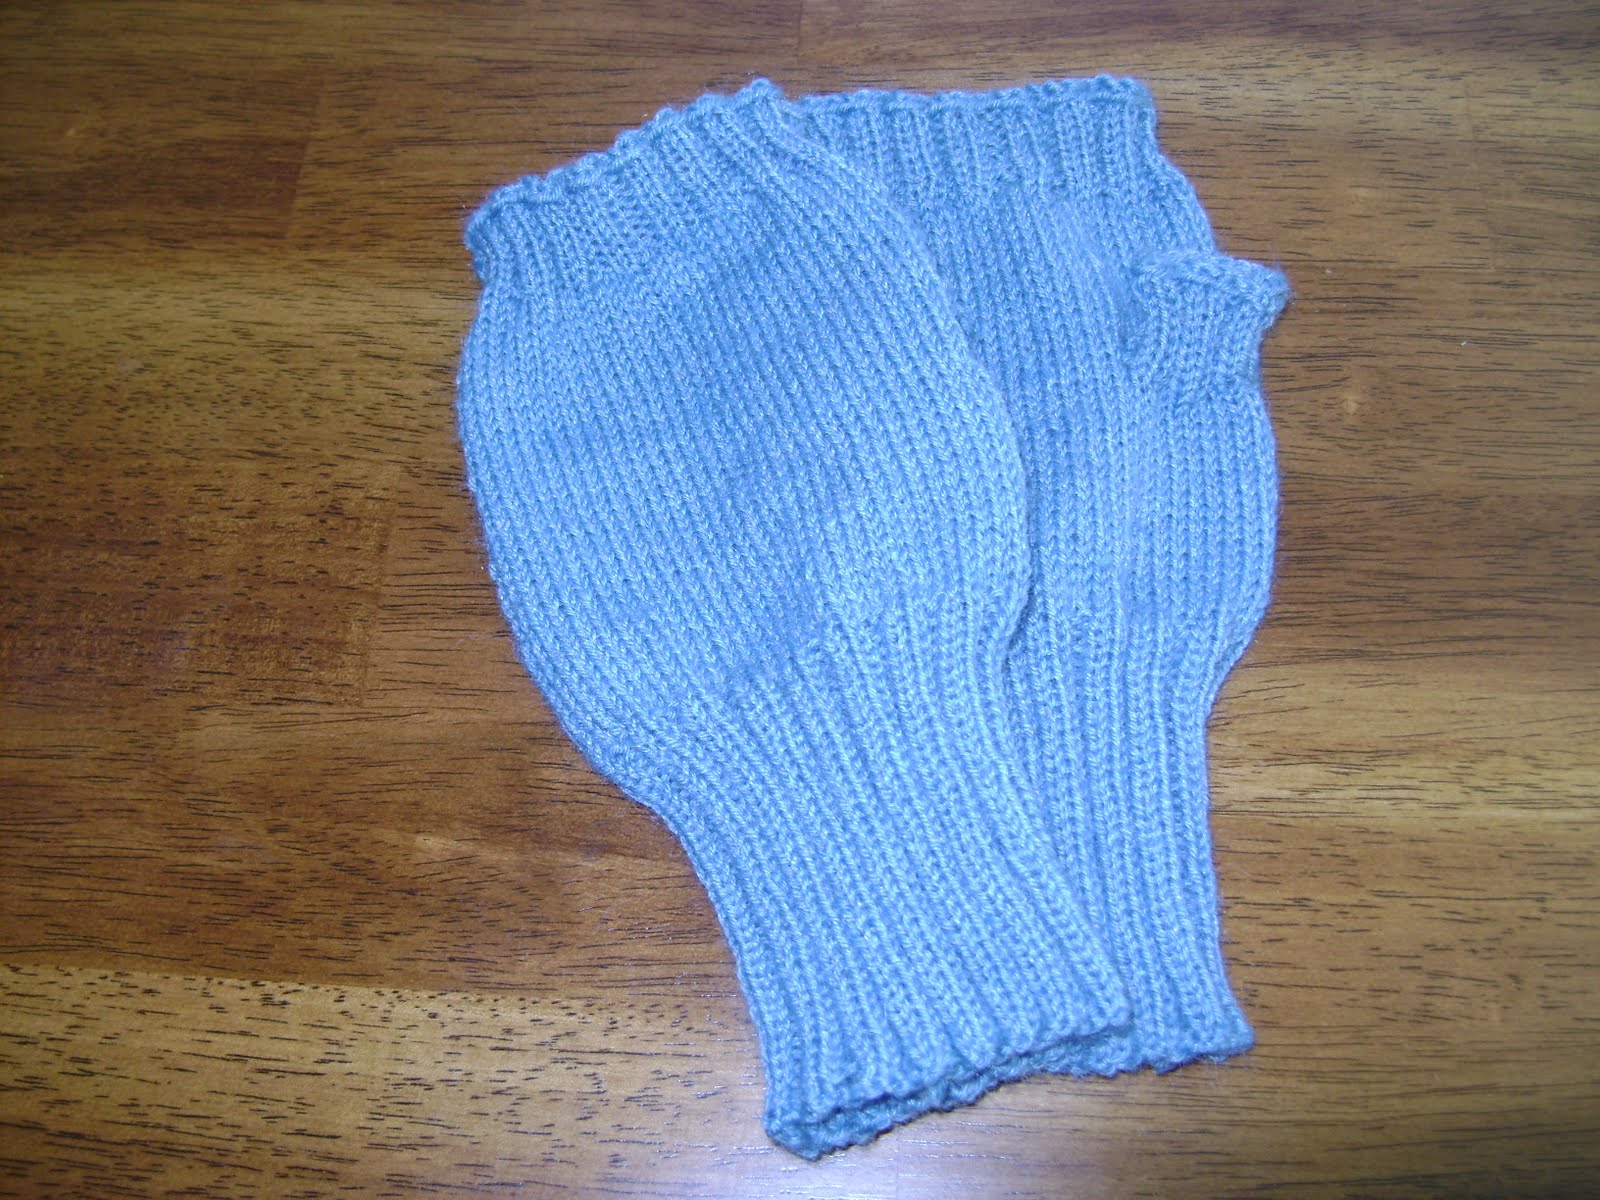 Crafts place: Fingerless Gloves